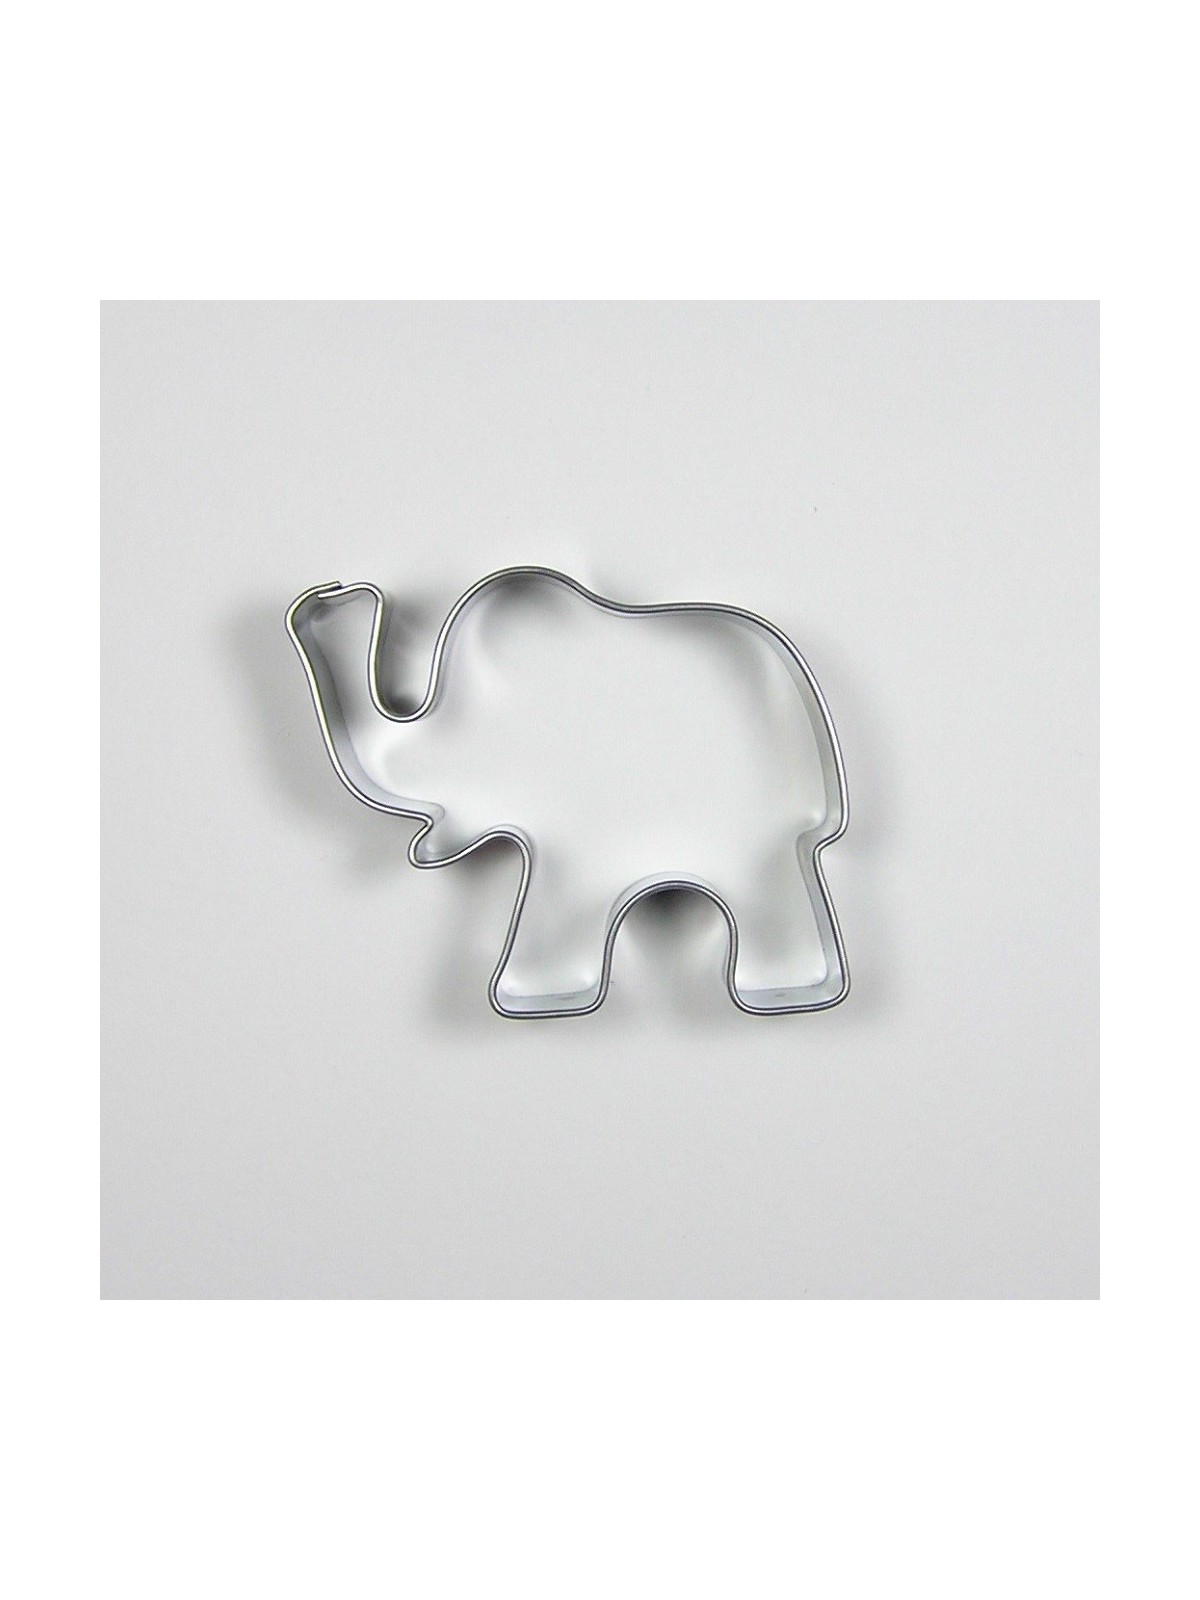 Stainless steel cutter - elephant 2